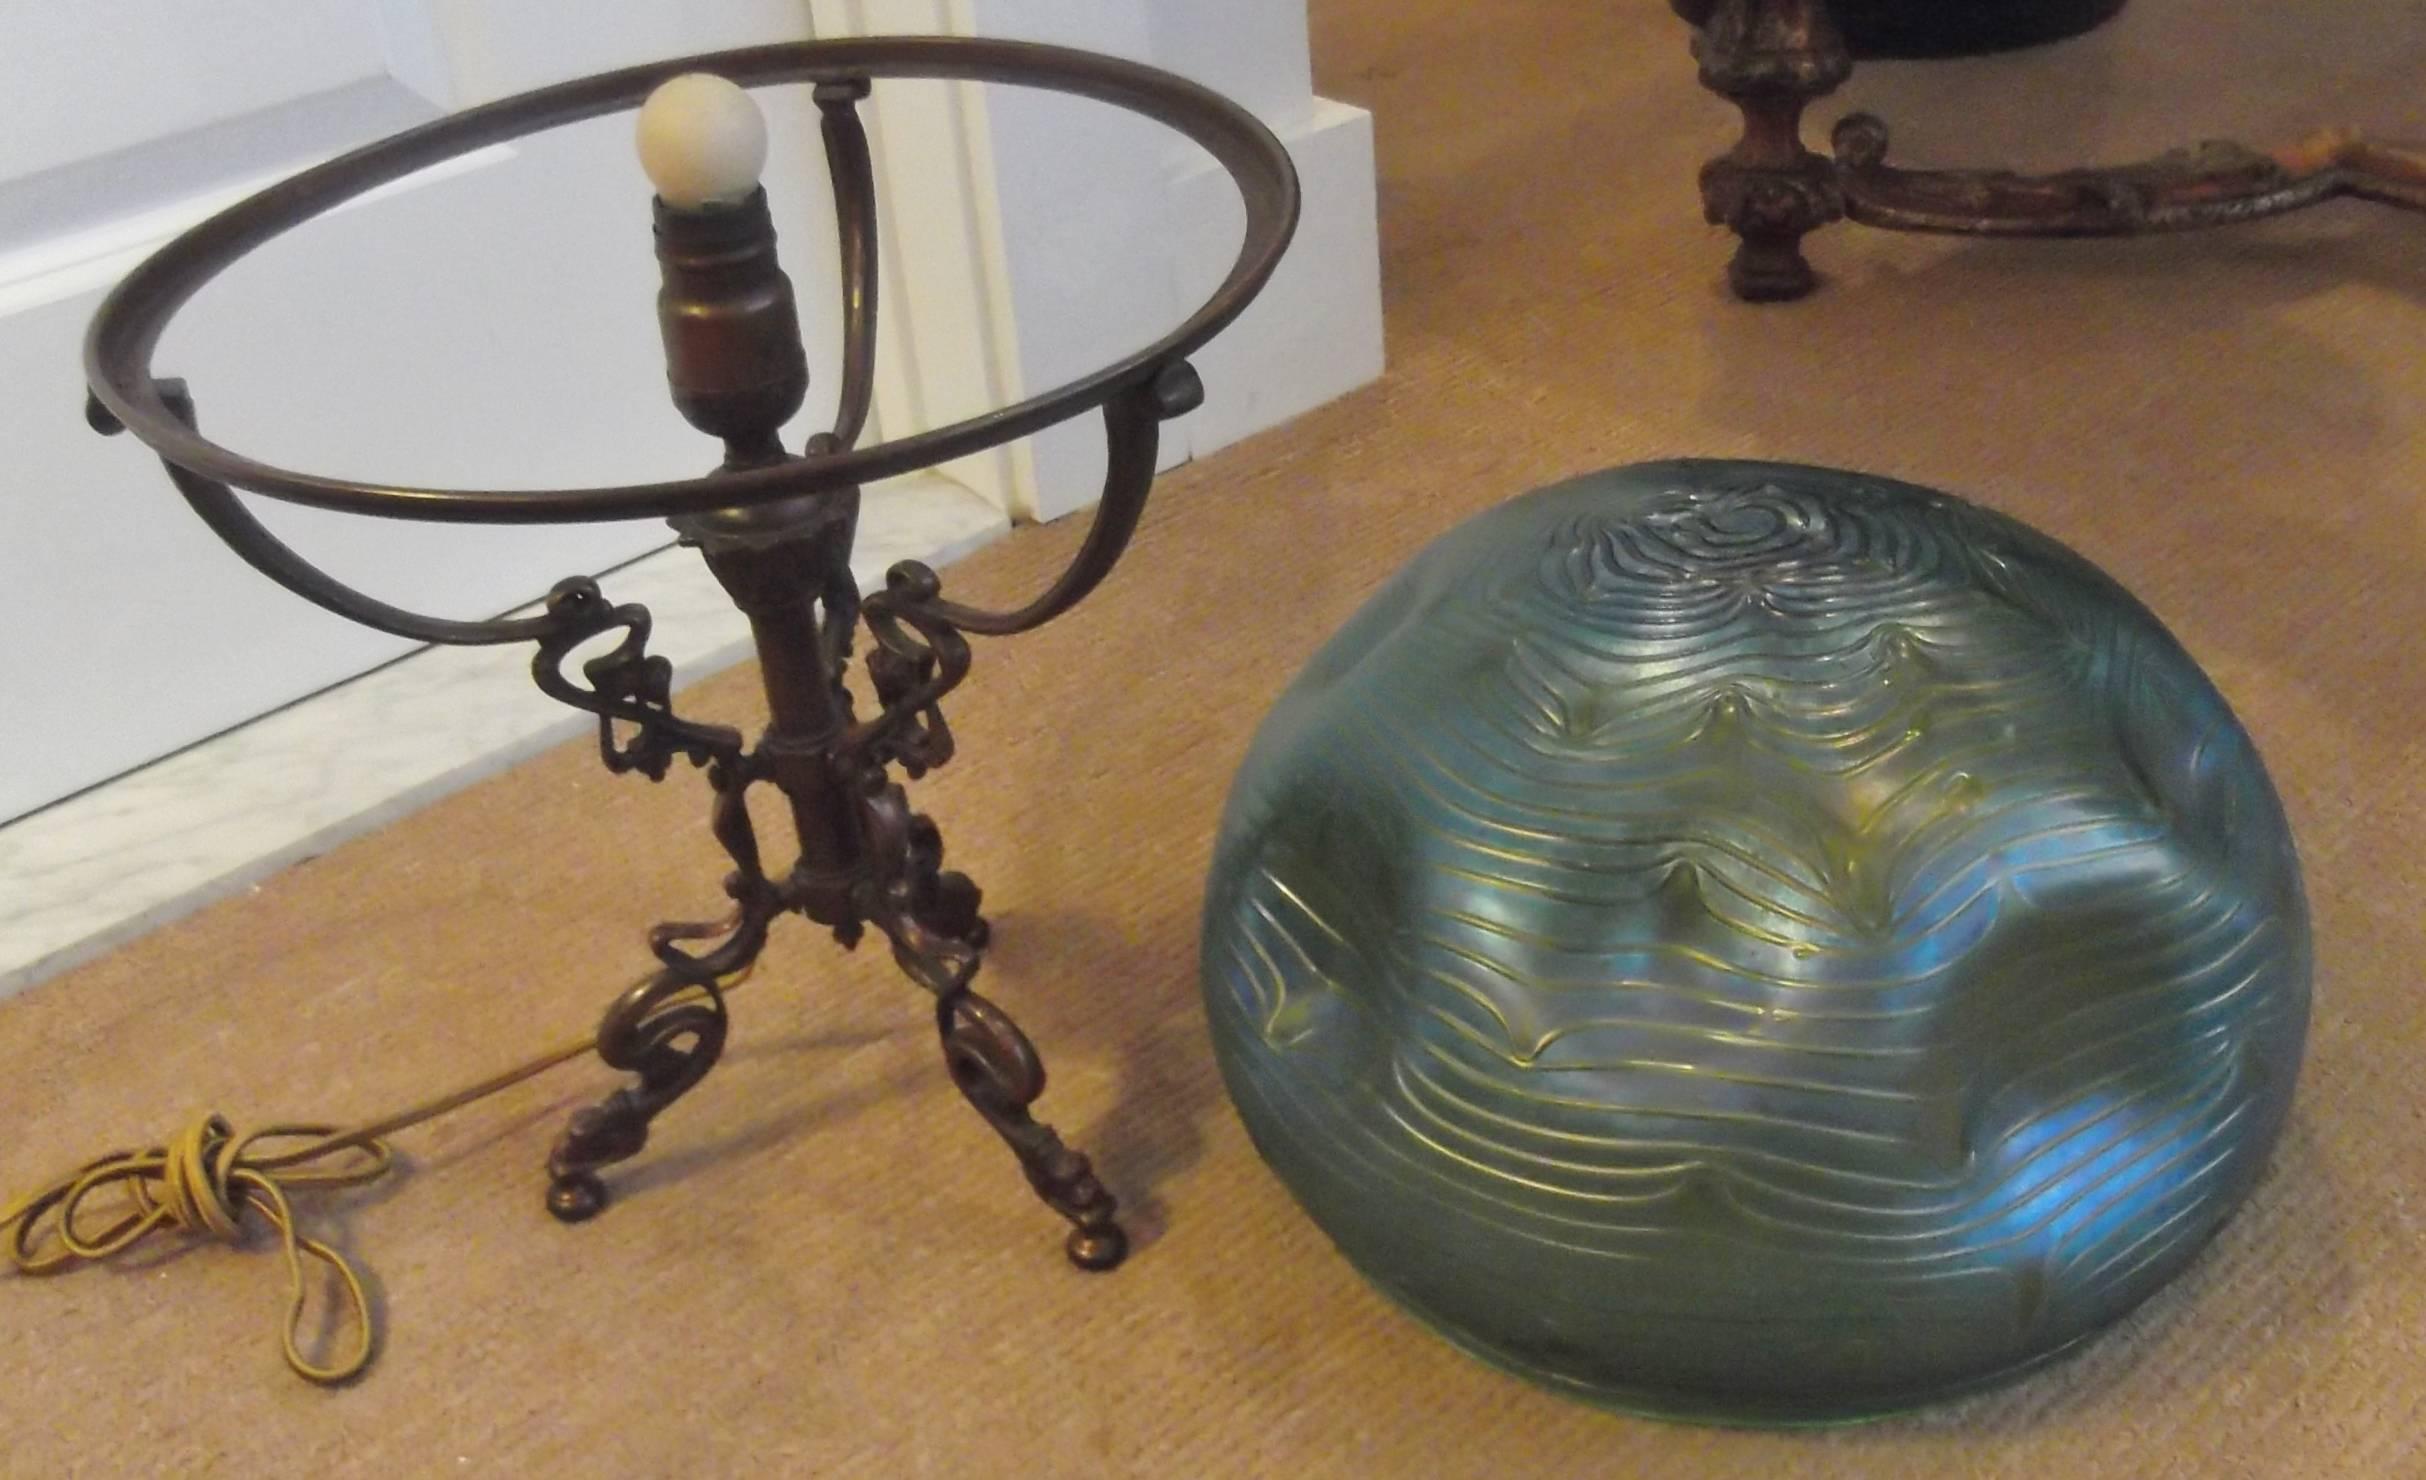 An iridescent shade with patterned and pinched glass resting on a tripod figural patinated bronze base. True Art Nouveau designed by Leopold Bauer. 12 diameter of the shade at the base.